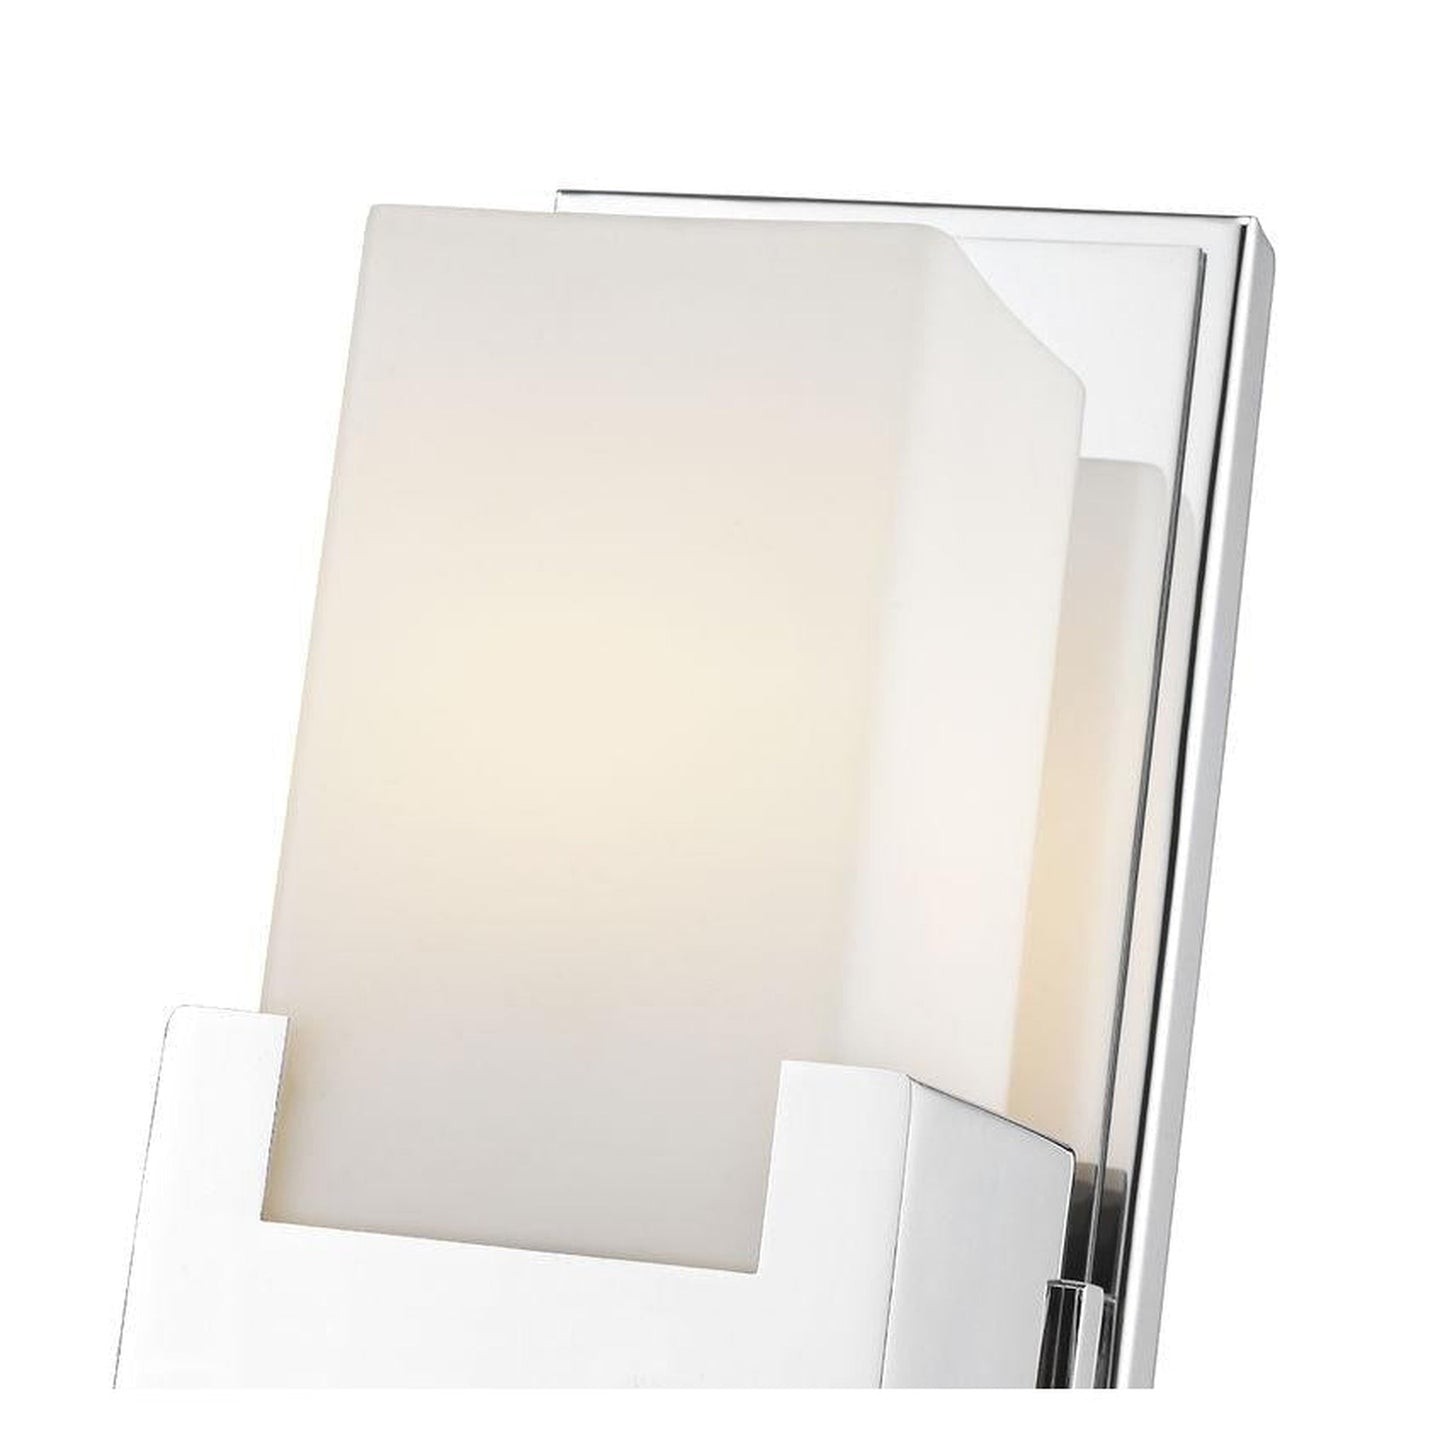 Z-Lite Peak 5" 1-Light LED Chrome Vanity Light With Clear and Matte Opal Shade